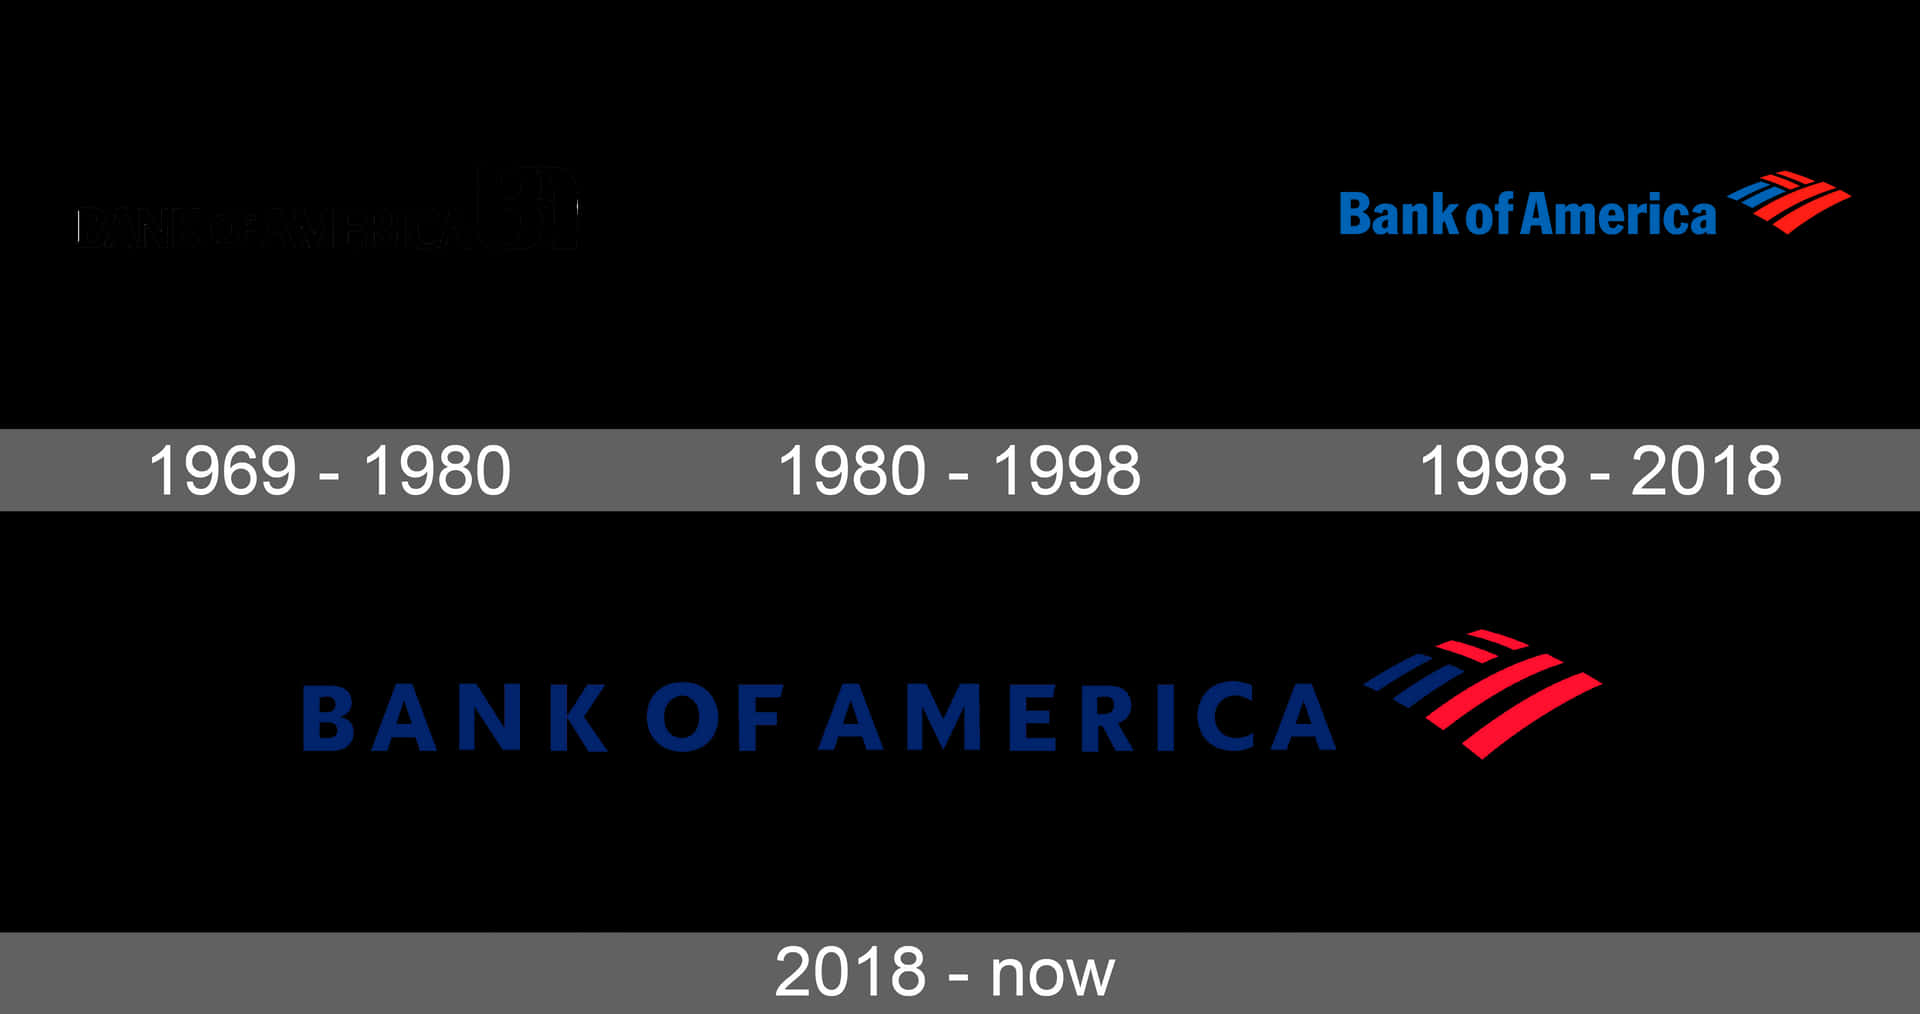 Banking with Bank of America